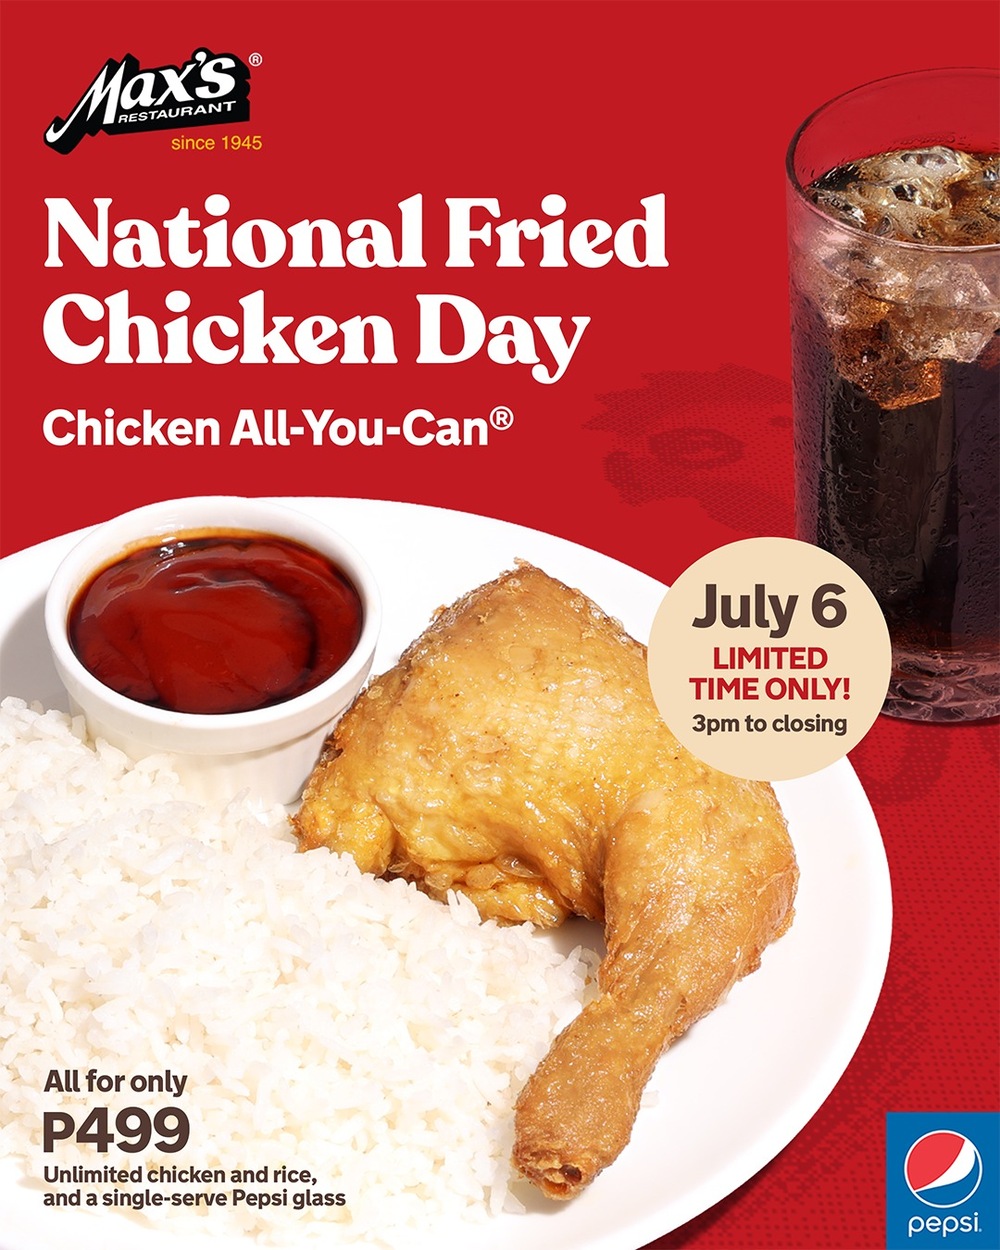 Awesome chicken deals and promos this National Fried Chicken Day 2023 from Max's Restaurant